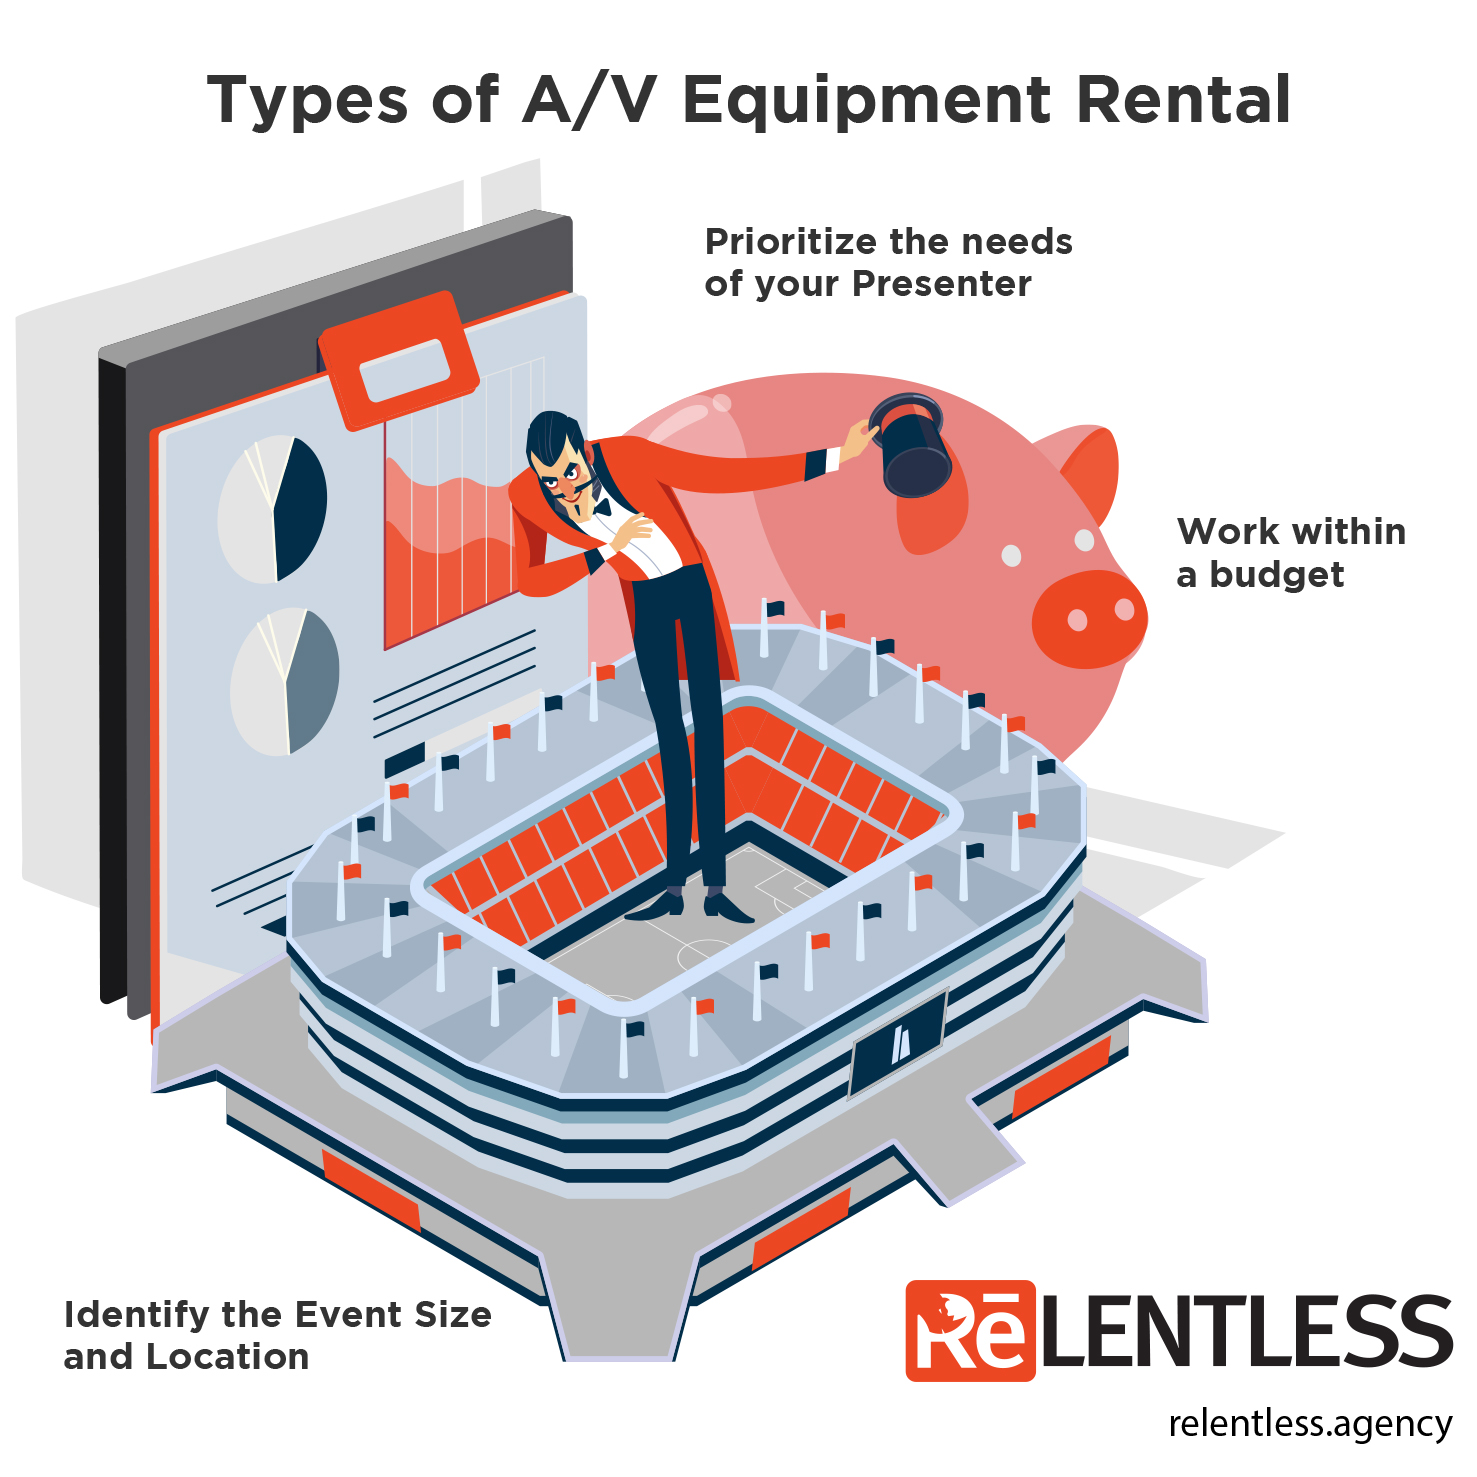 Must Know and 5 Tips Before Renting an A/V Equipment